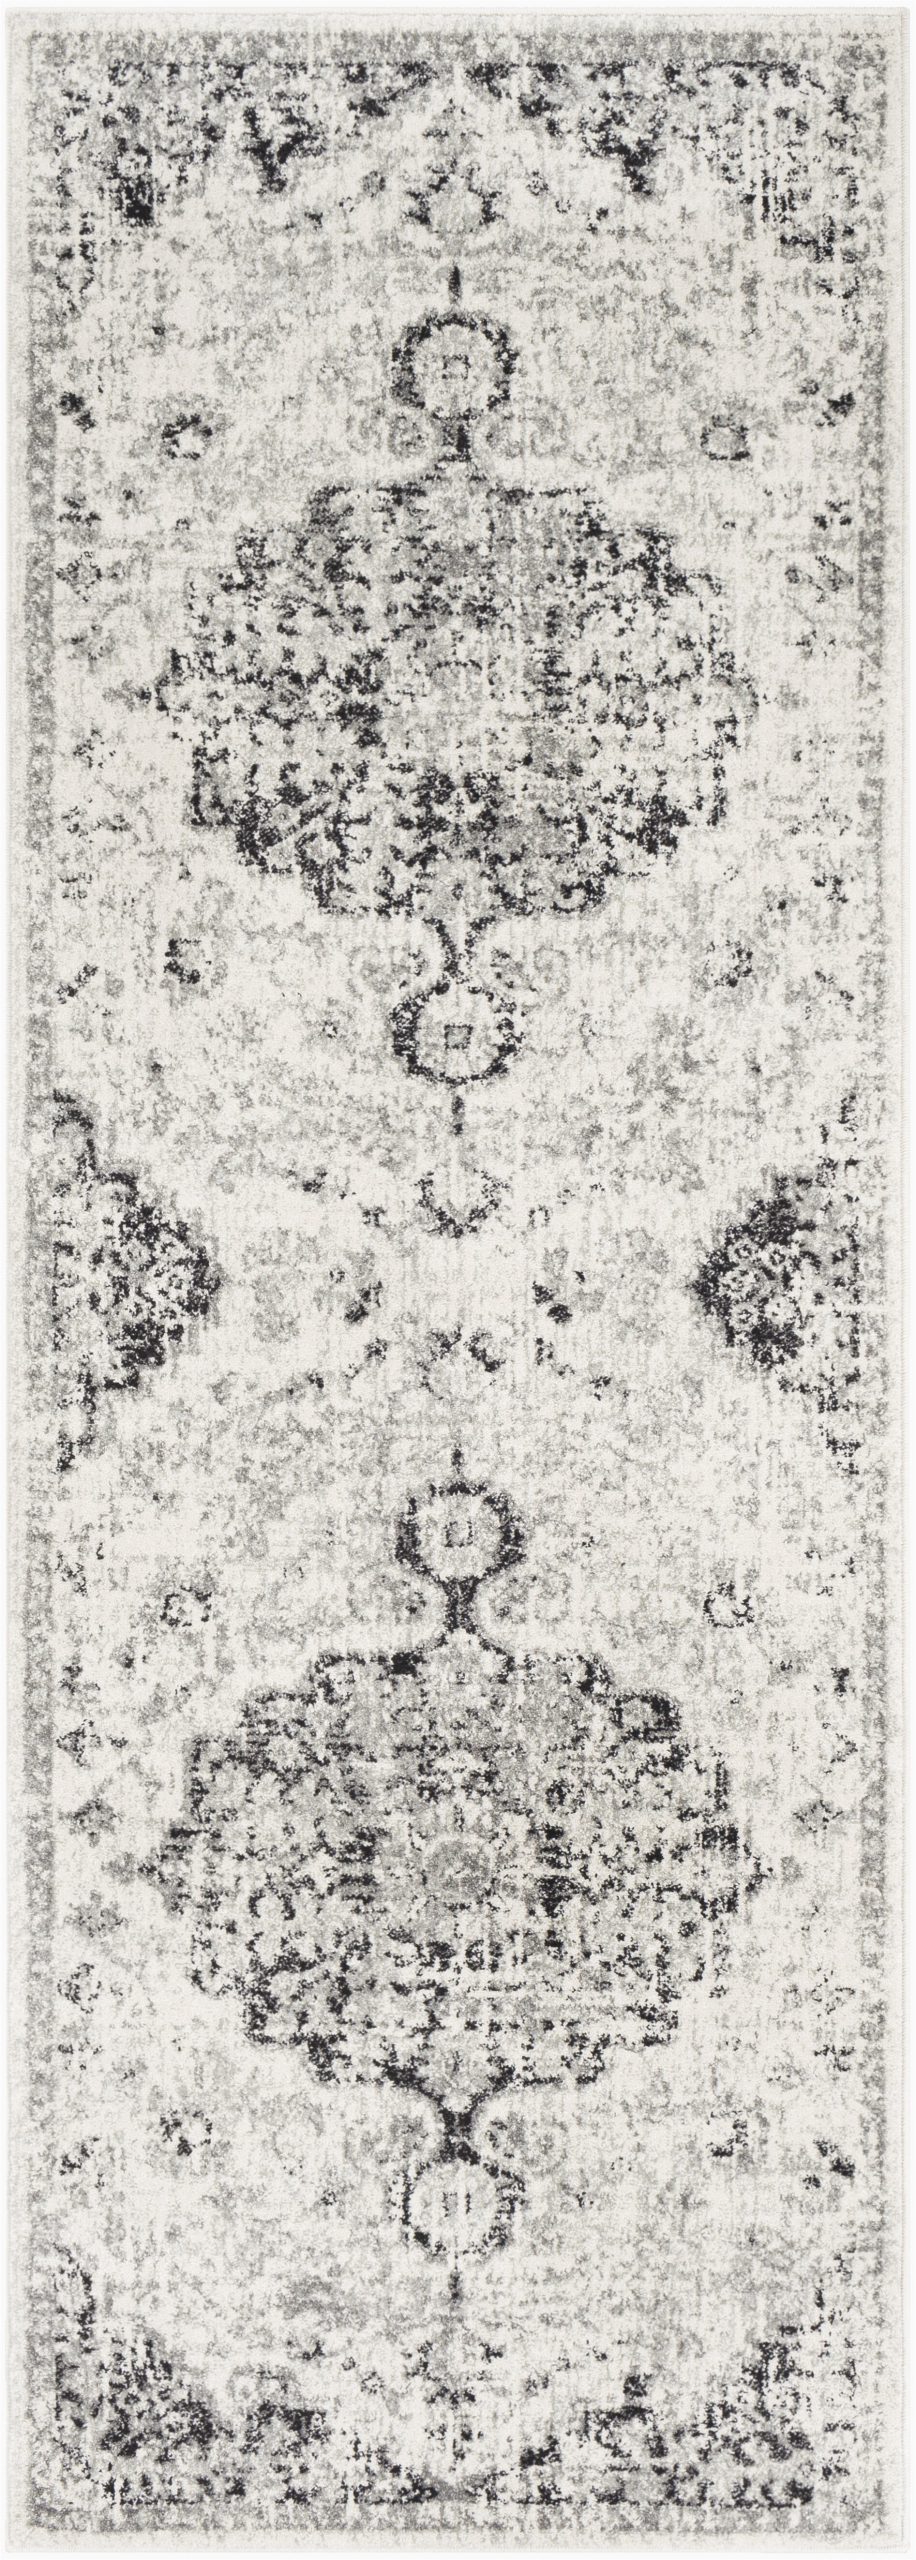 Hillsby Charcoal Light Gray Beige area Rug Hillsby Black Light Gray Beige Charcoal area Rug